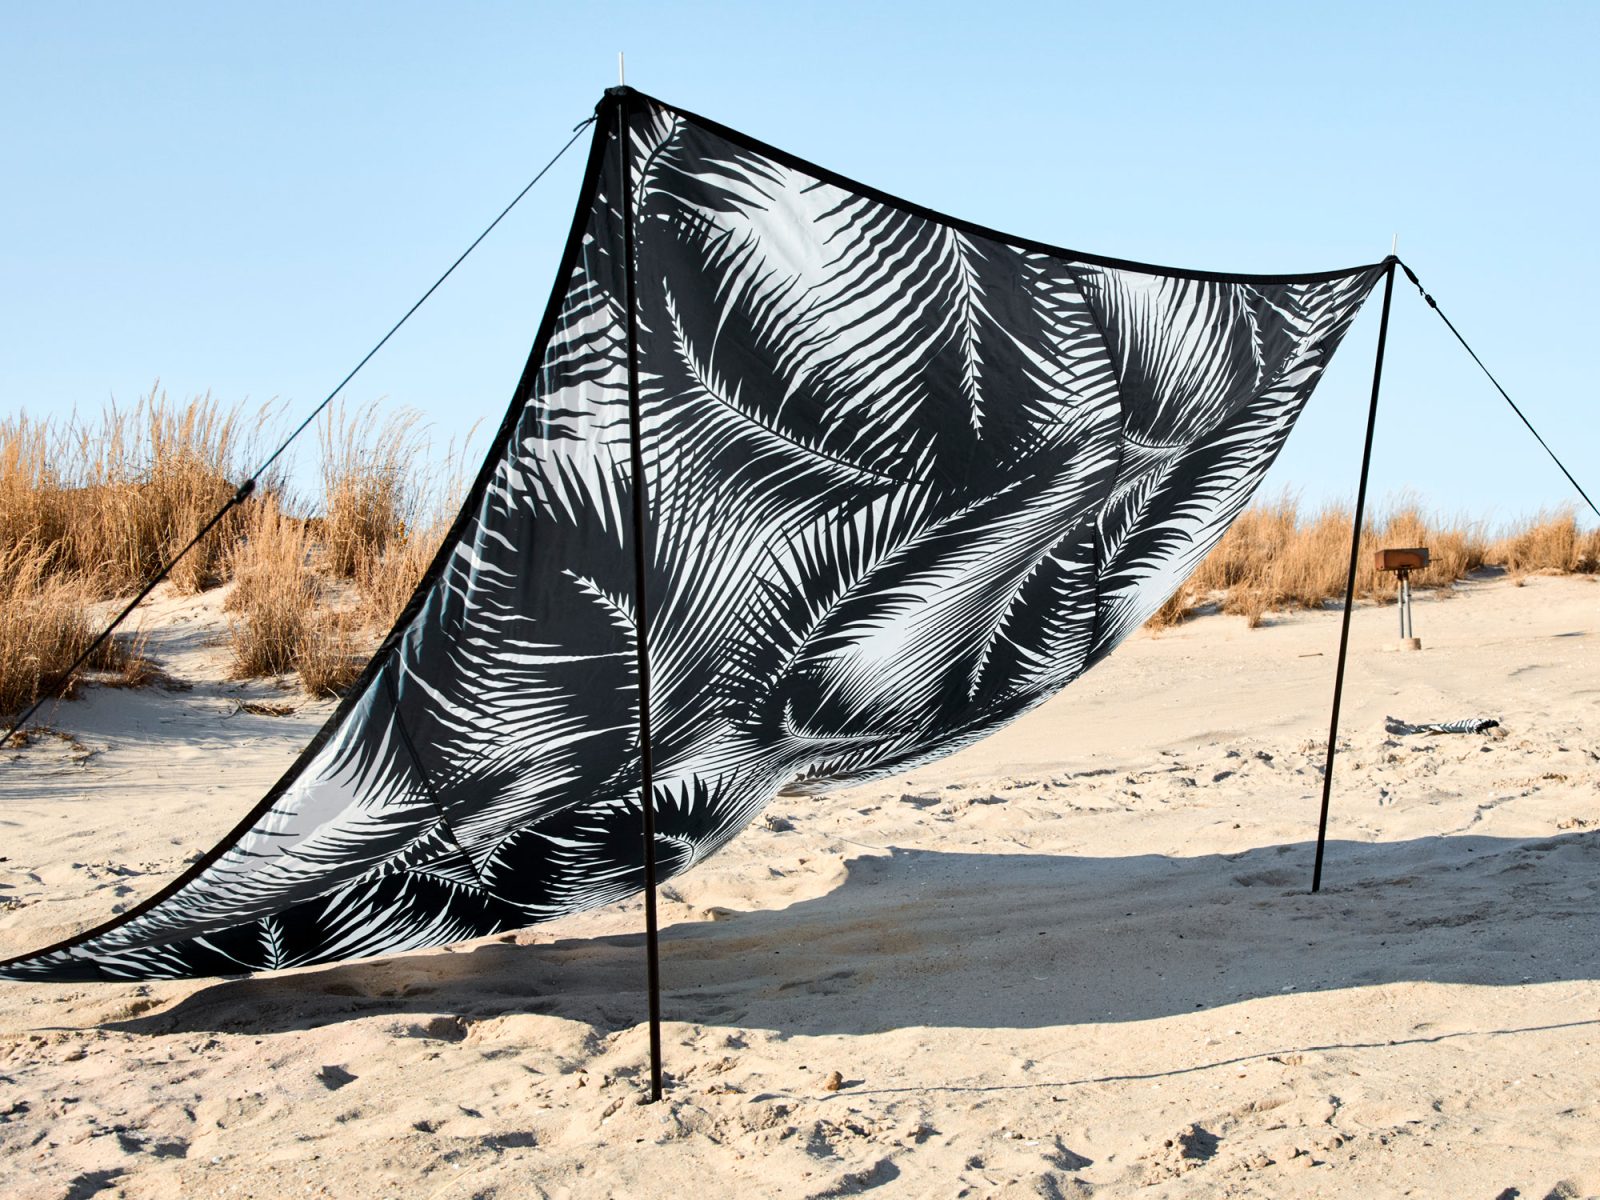 Simple black and white beach wind and sun shelter, from IKEA KÅSEBERGA surf collection.